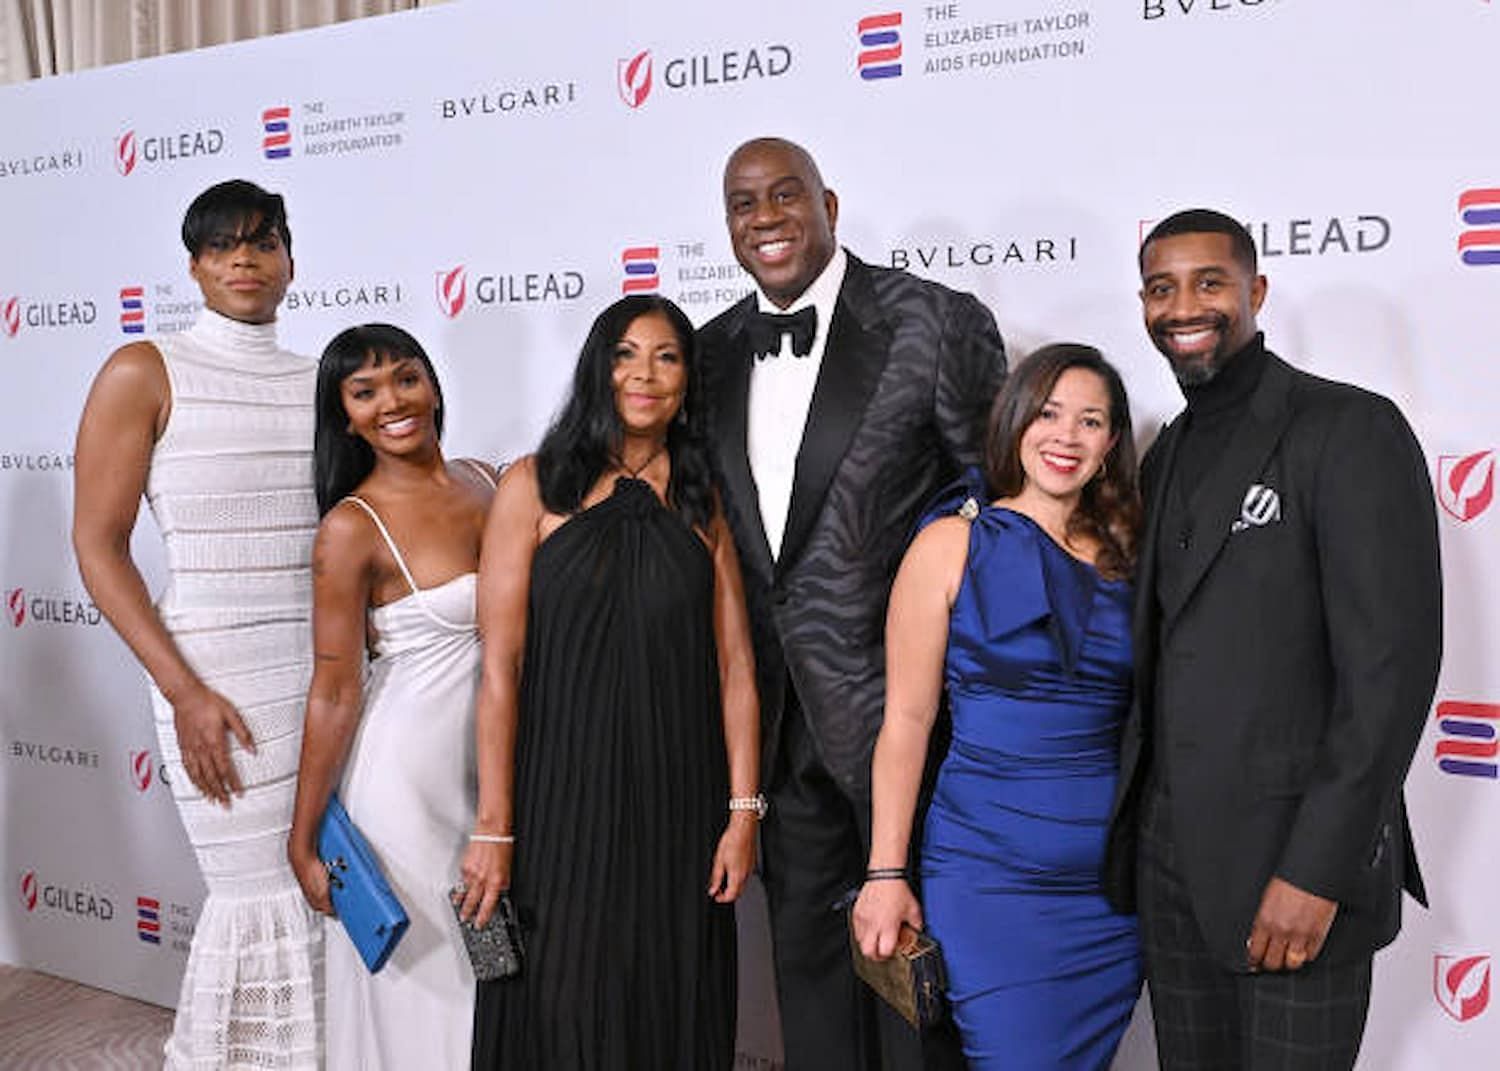 Magic Johnson attending the Elizabeth Taylor Ball to End AIDS